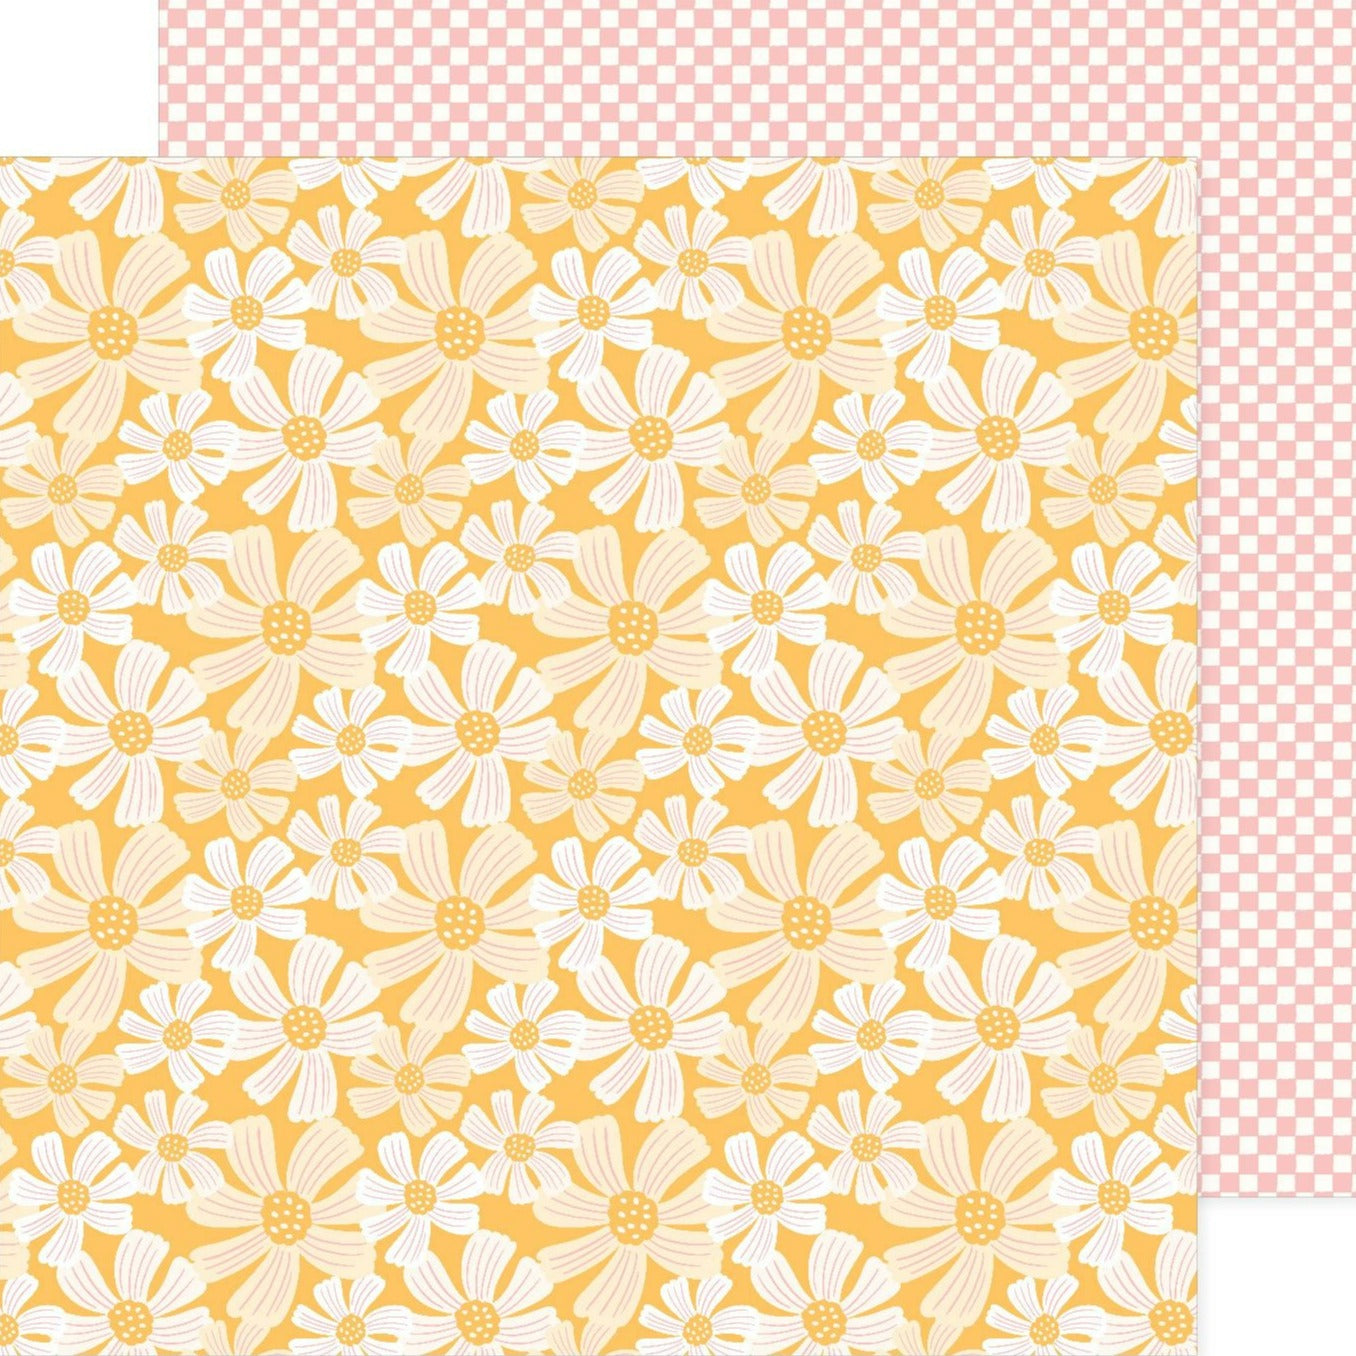 (white daisies of varied sizes on a sunny yellow background - pink and white checkered background reverse). 12x12 double-sided paper by Pebbles.